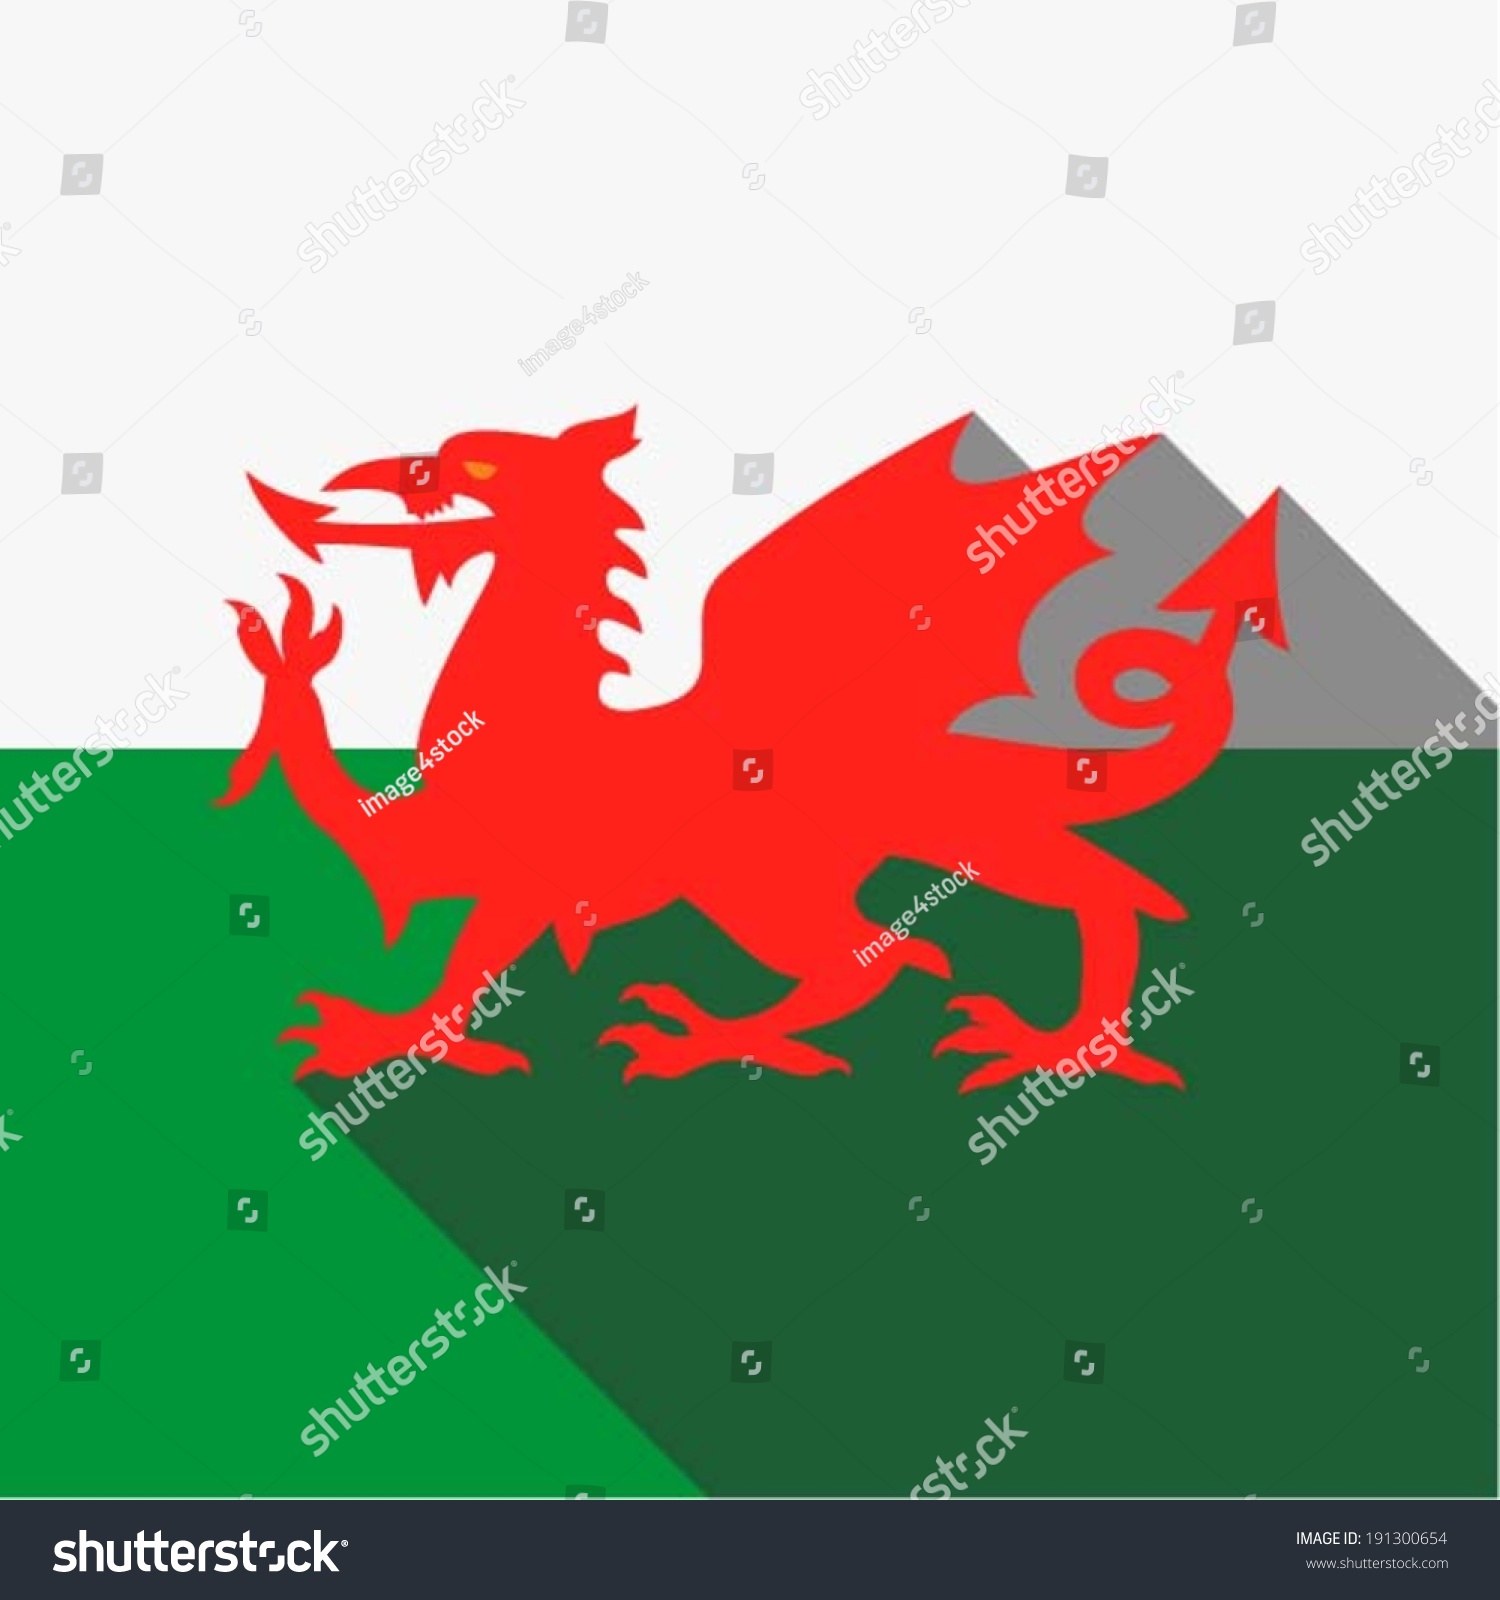 Flag of Wales / UK - Red dragon on the white and green flag, vector illustration, web icon, app design #191300654